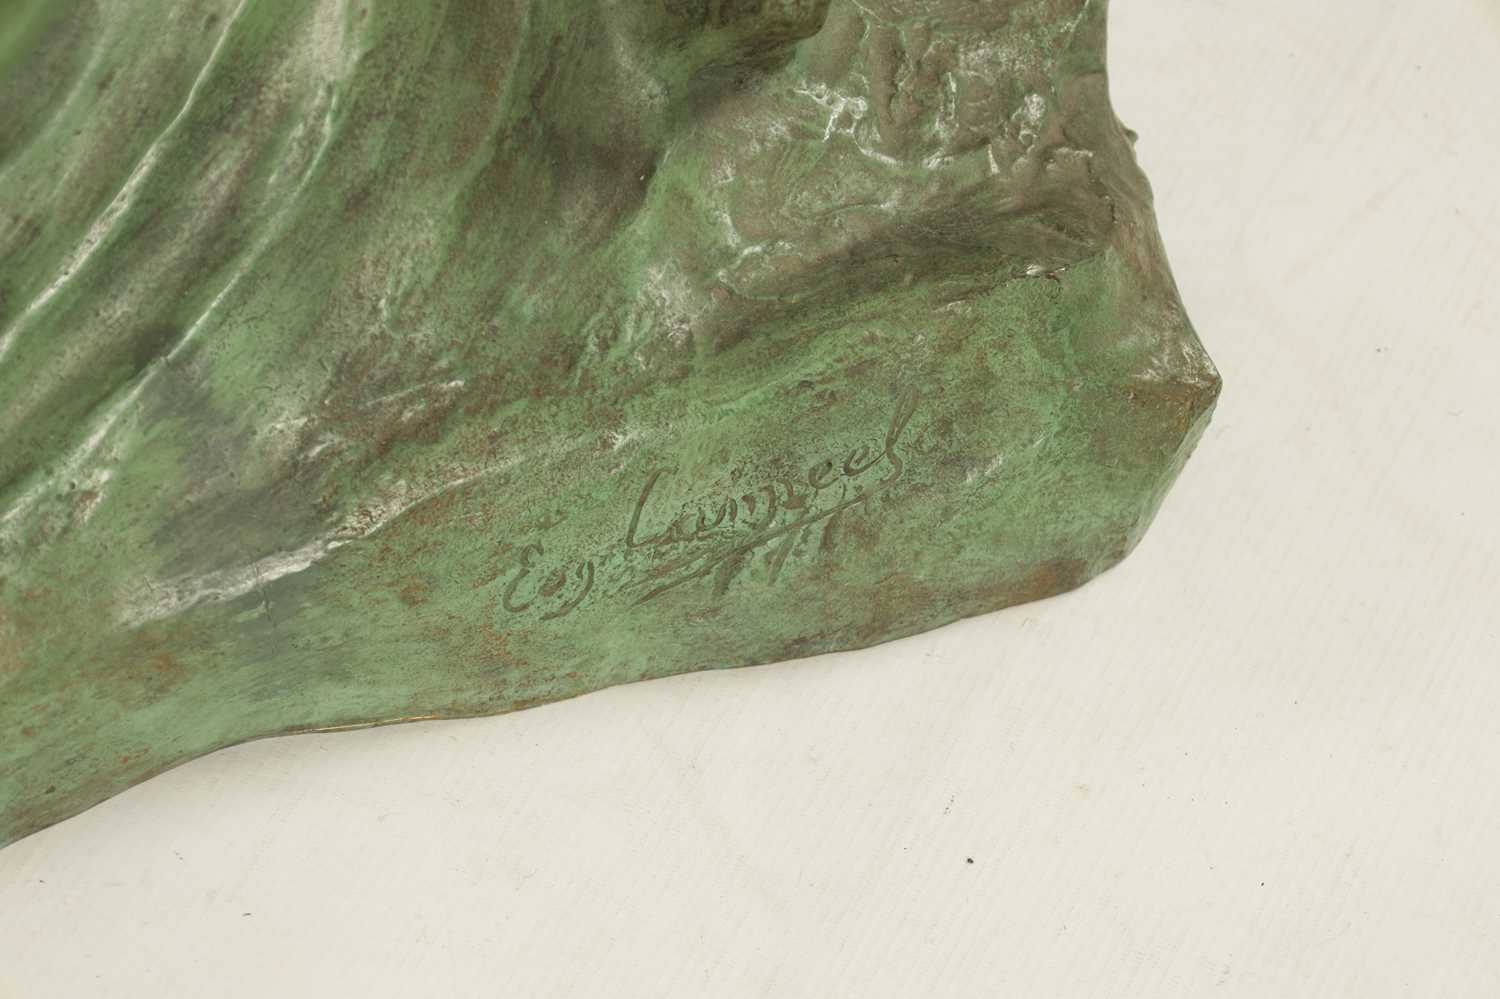 EUGENE CANNEEL (BELGIAN, BORN 1882). AN EARLY 20TH CENTURY PATINATED GREEN BRONZE SCULPTURE - Image 5 of 5